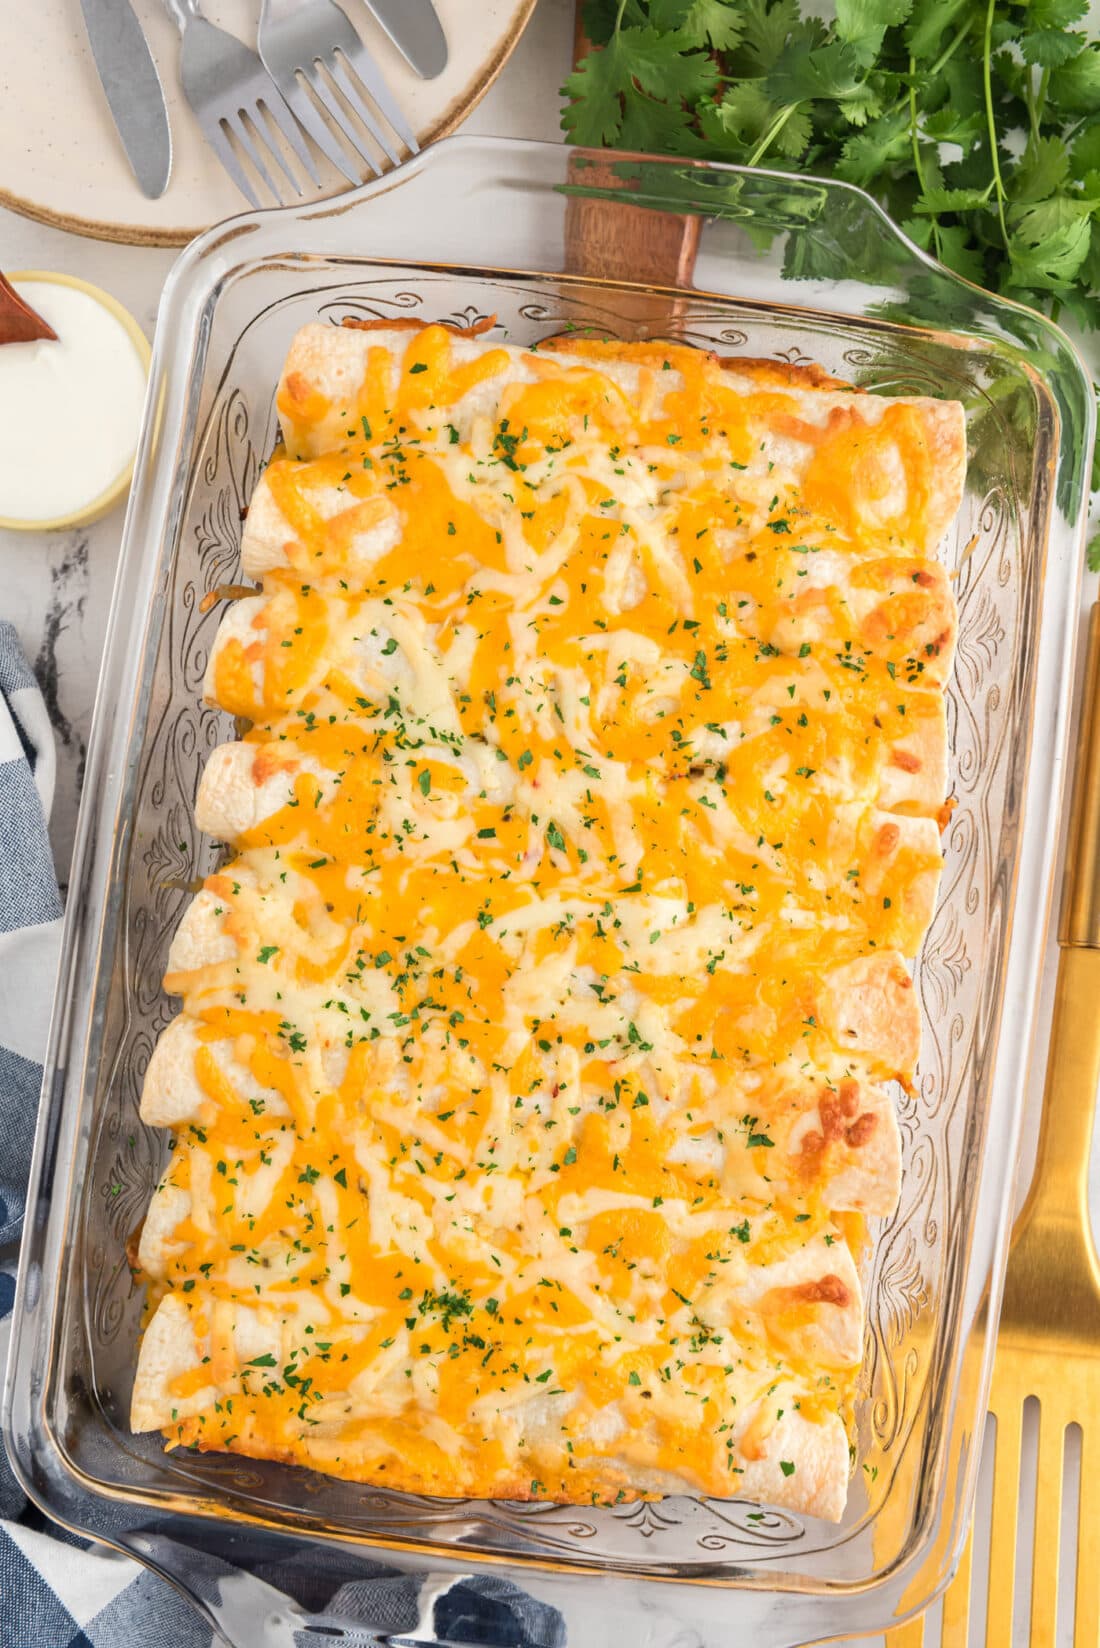 Shredded Chicken and Chile Enchiladas in a glass baking dish